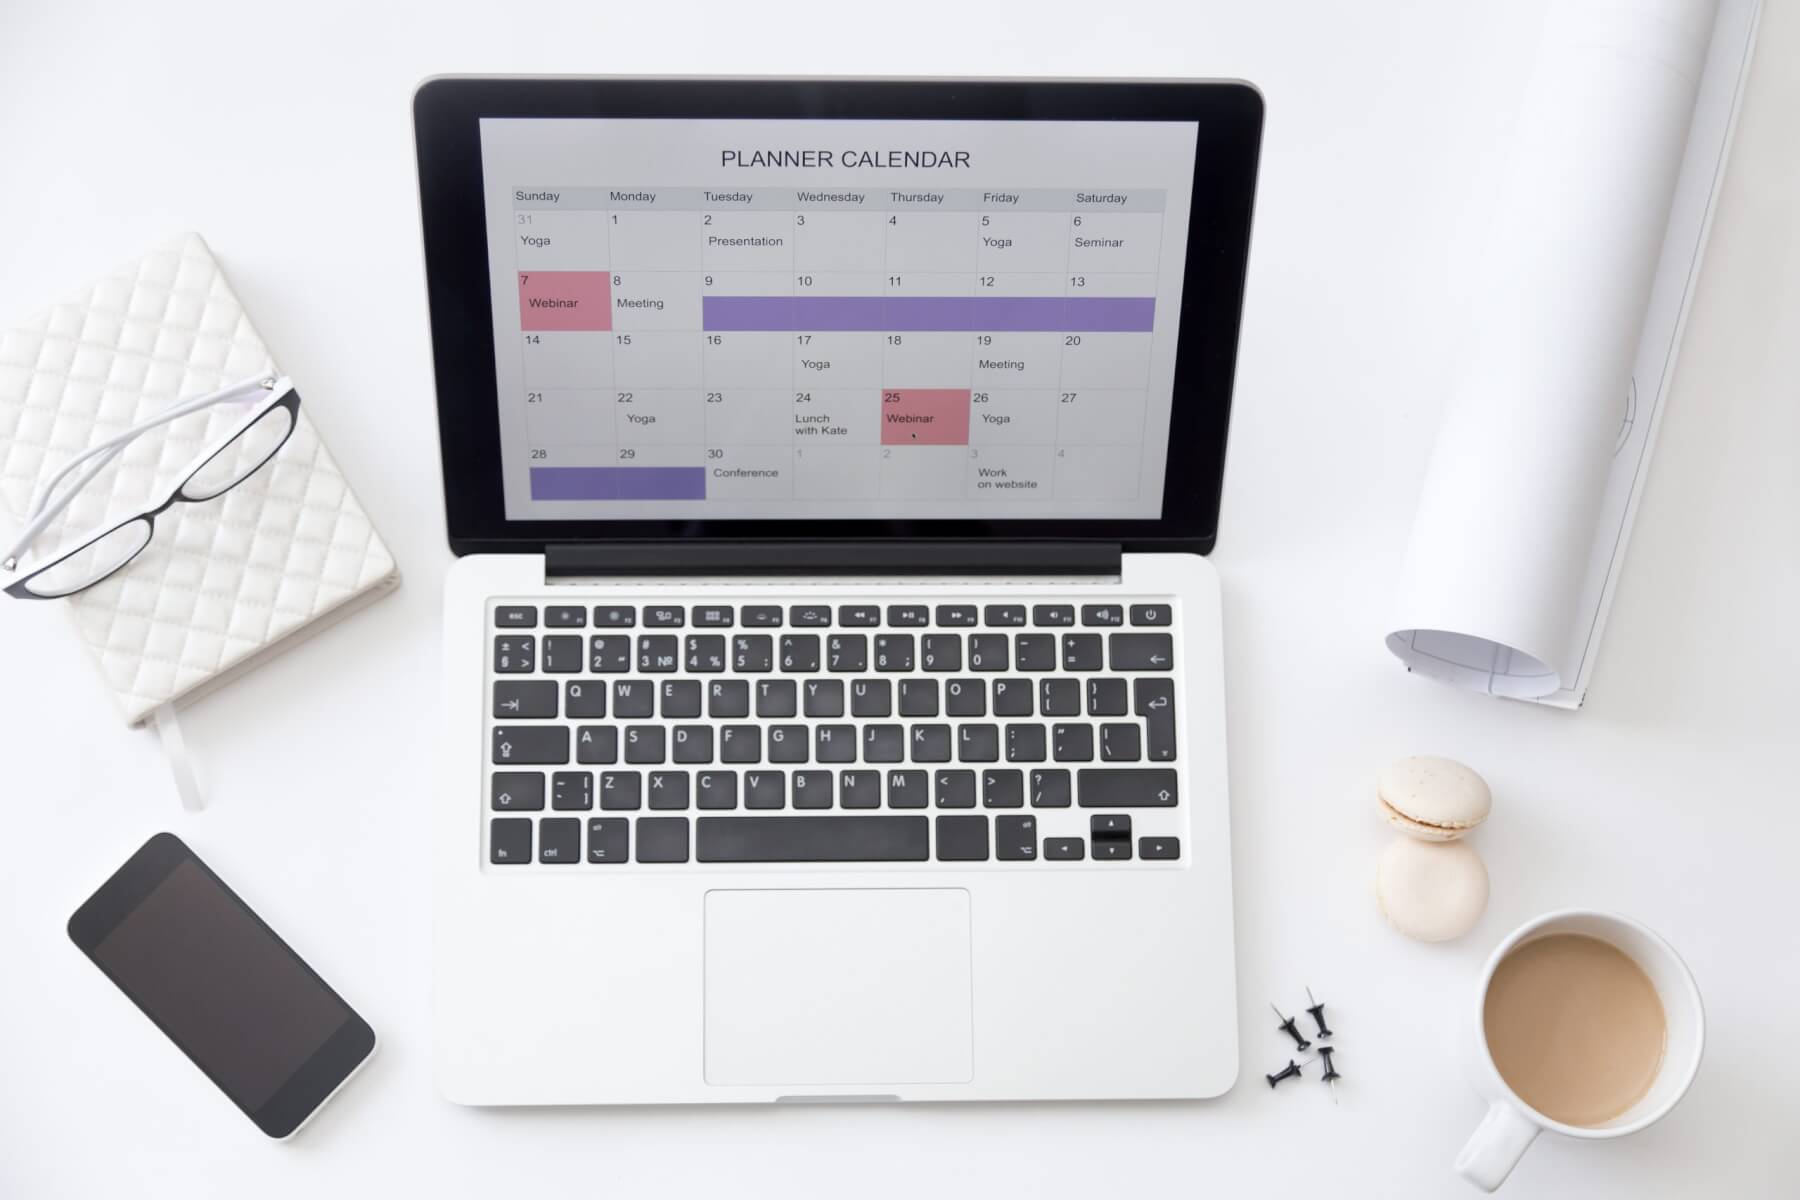 Content Calendar: how to create one for your Miami business